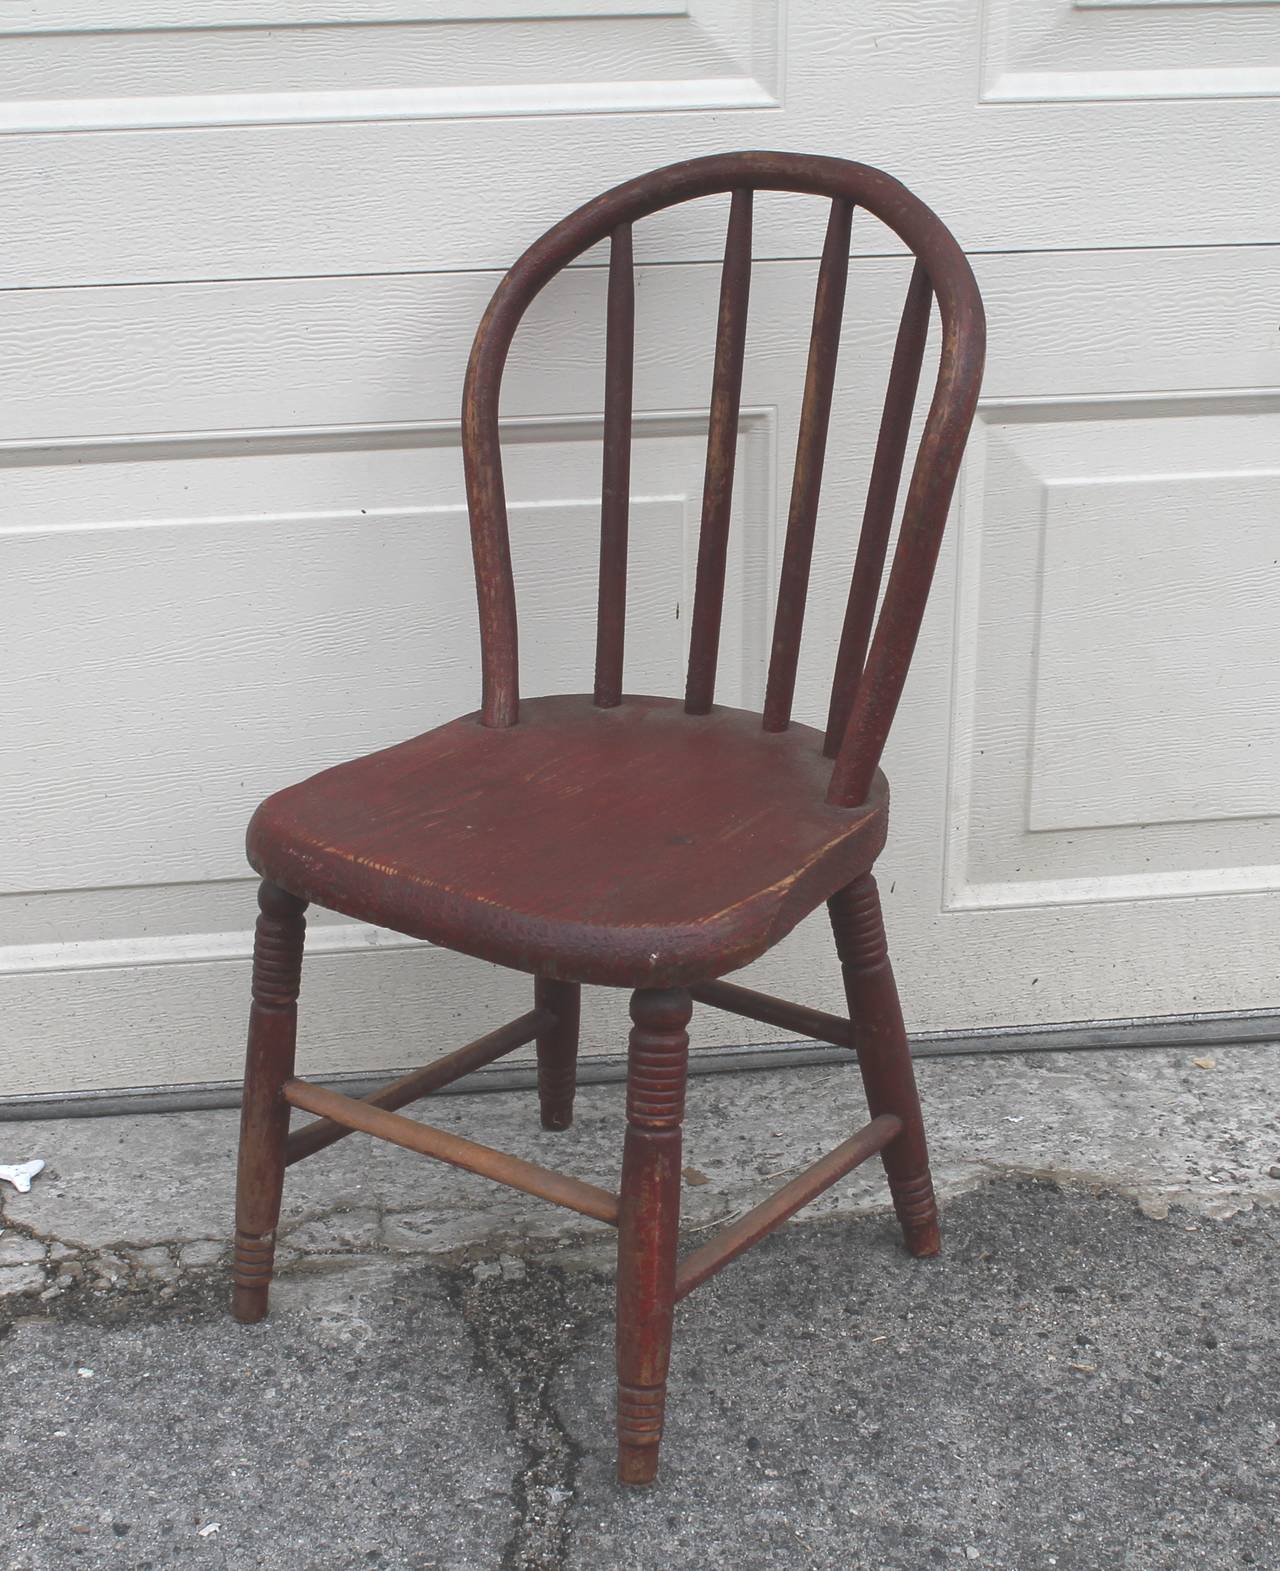 This hoop back child's chair has a wonderful original red crackle surface. This small windsor or plank bottom is in as found sturdy condition. Great for your child during the holidays and there after. This chair was found and made in Pennsylvania.